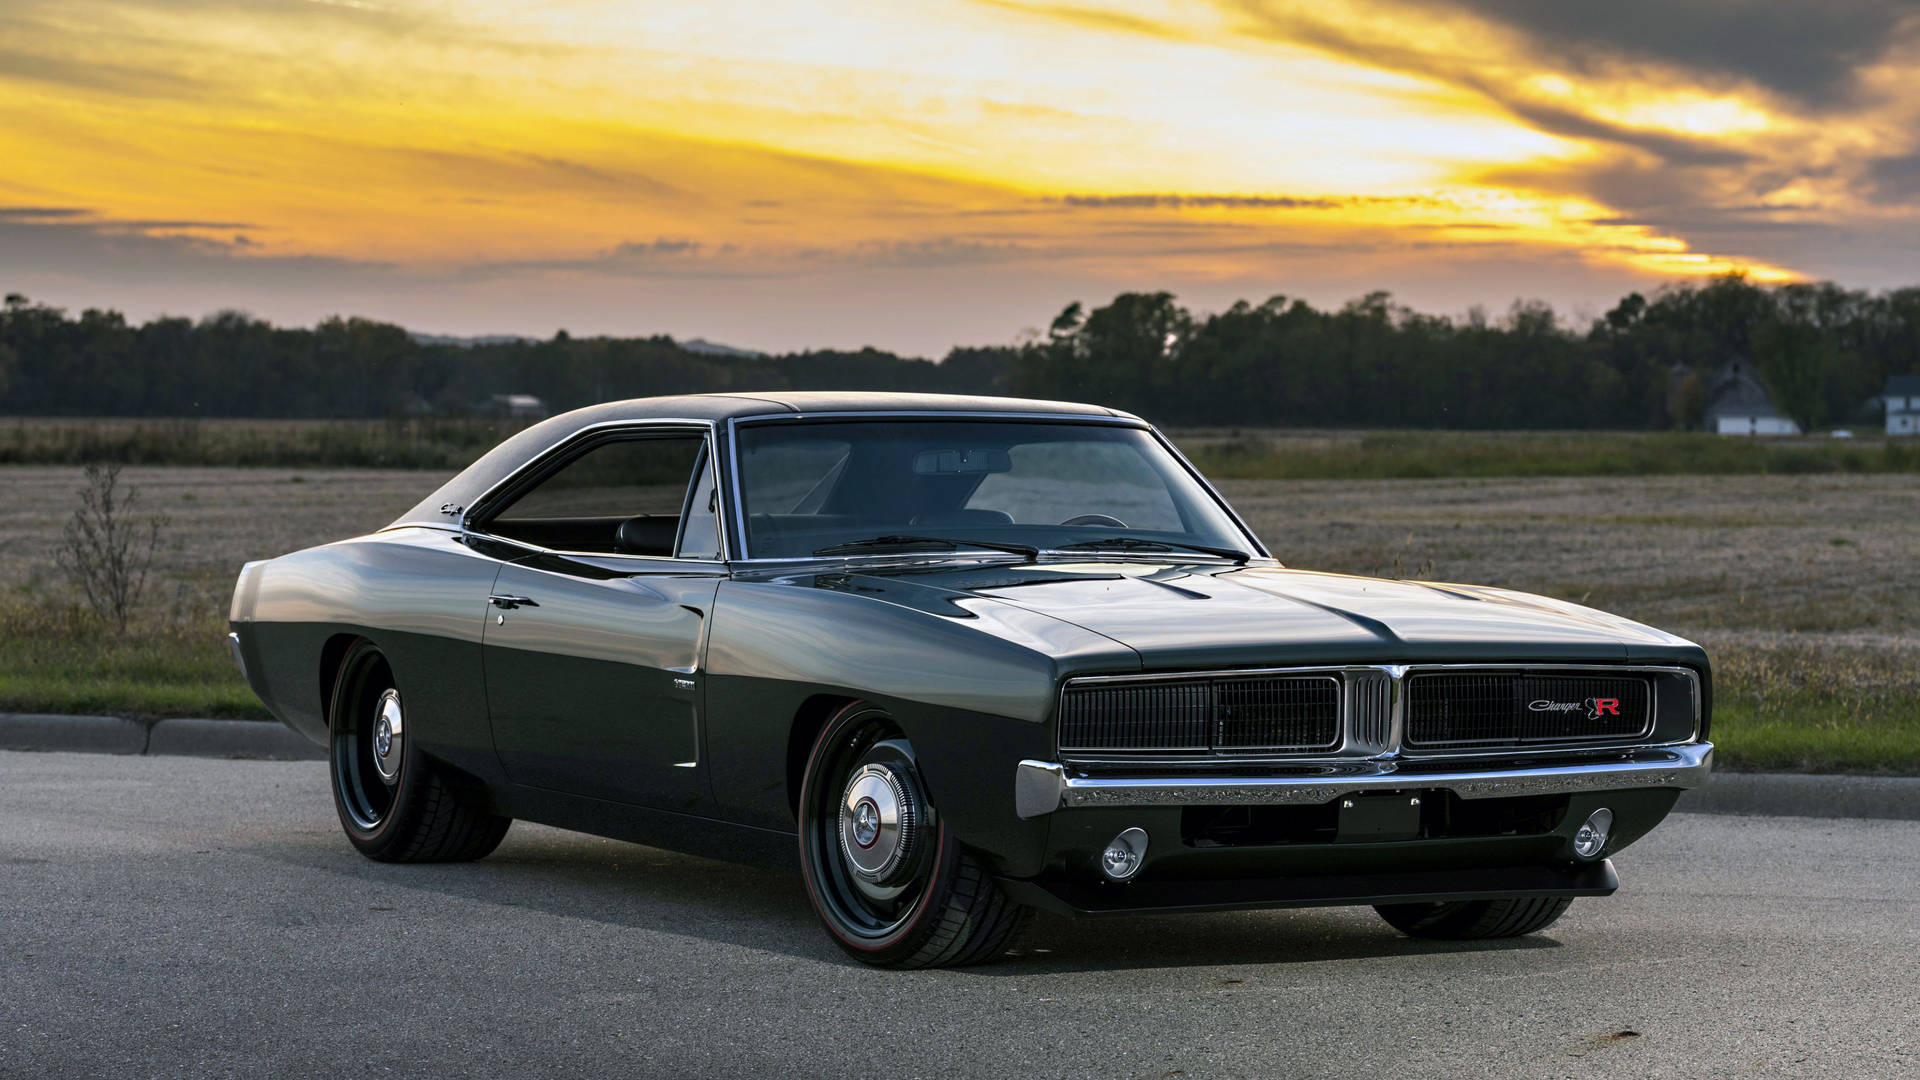 Caption: Classic Elegance With Power - 1969 Dodge Charger Defector Background